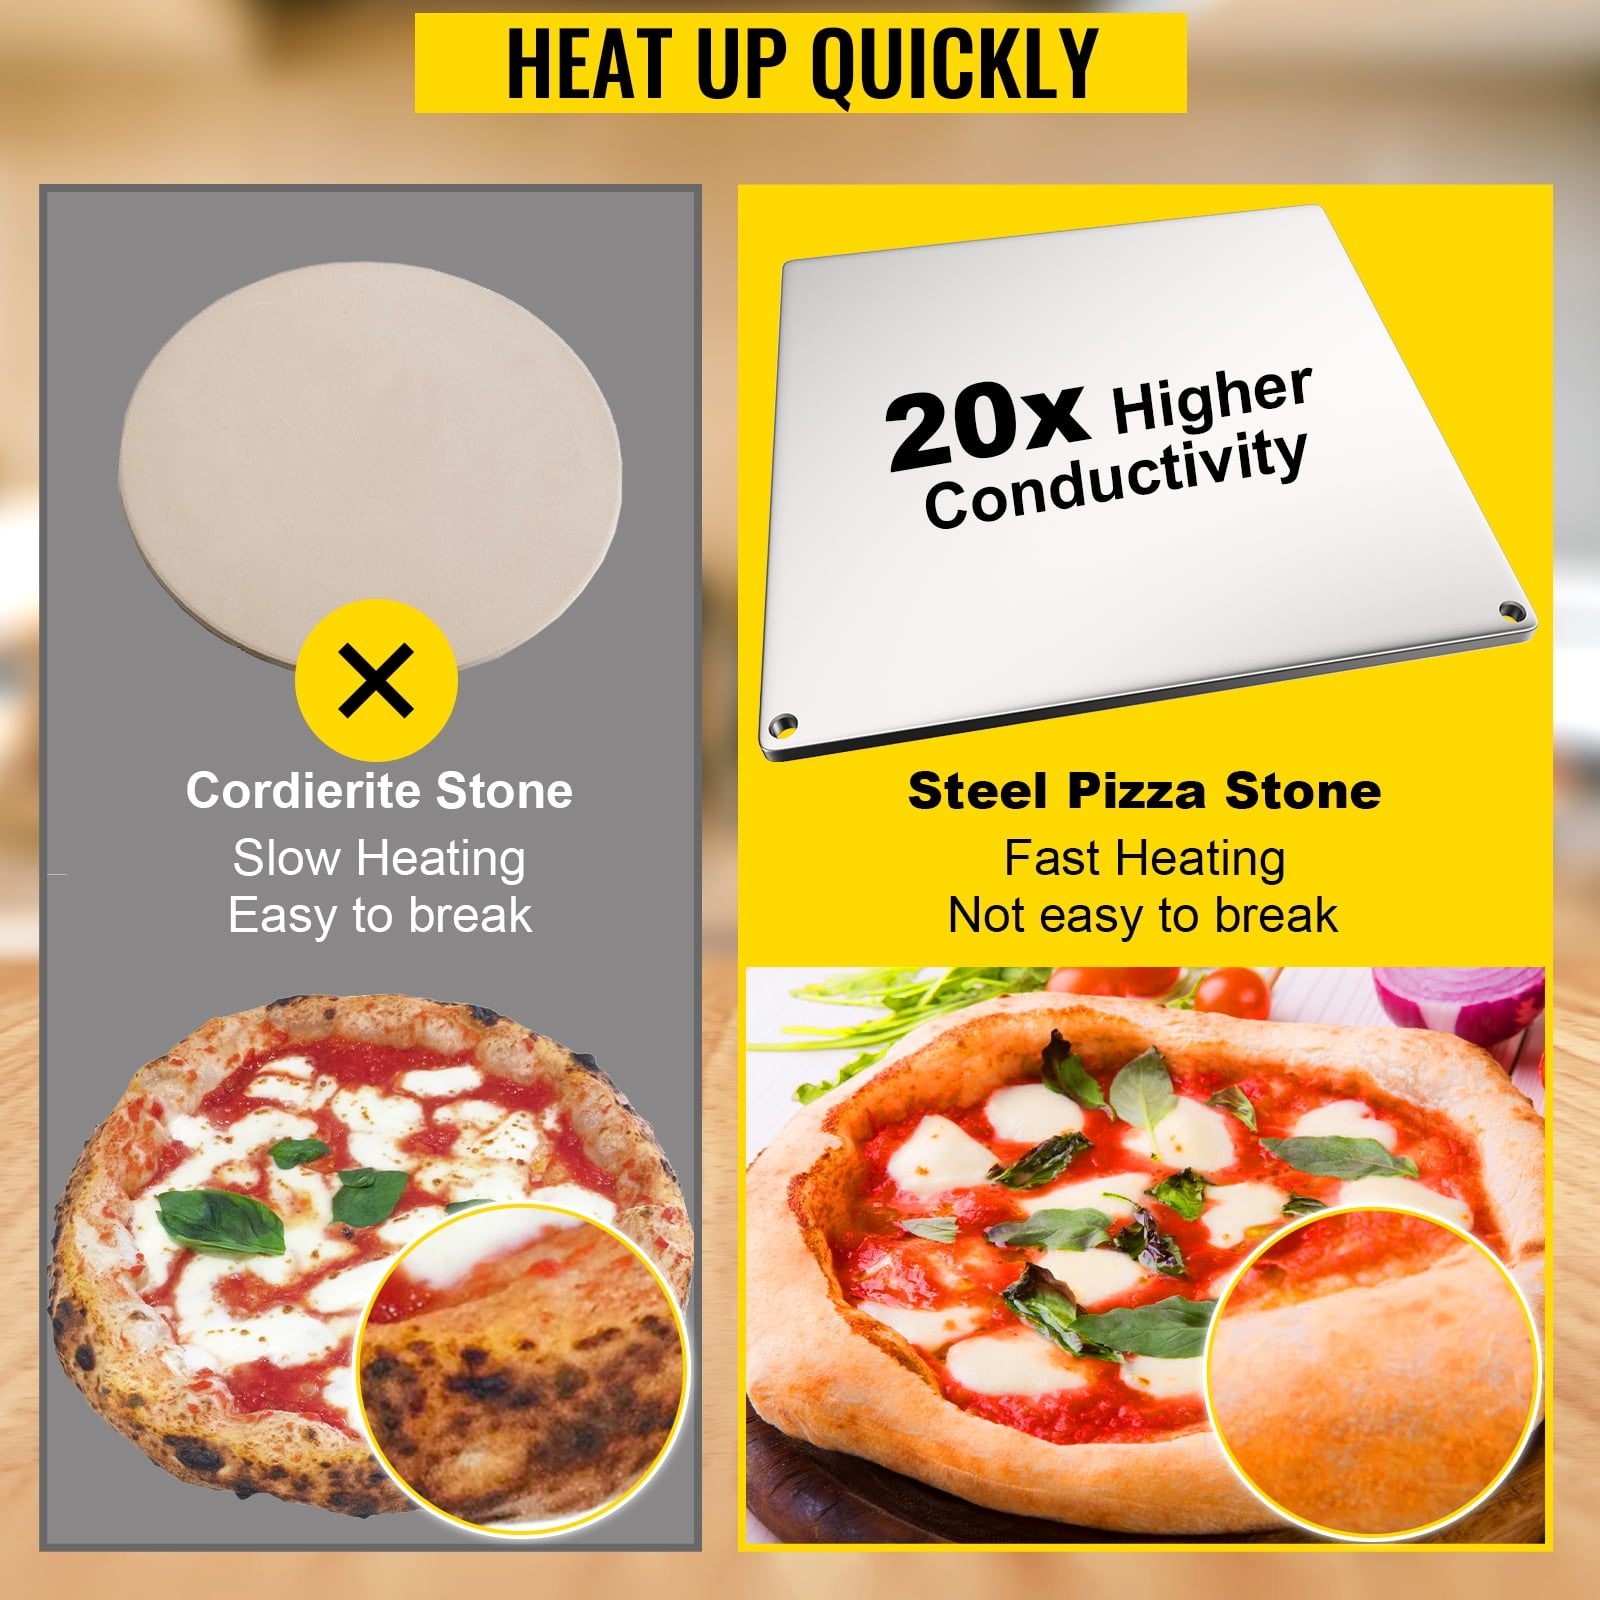 1/4 x 16 x 16 Steel Plate, A36 Steel, 0.25 Thick, Use for Pizza Steel  After descaling and Cleaning